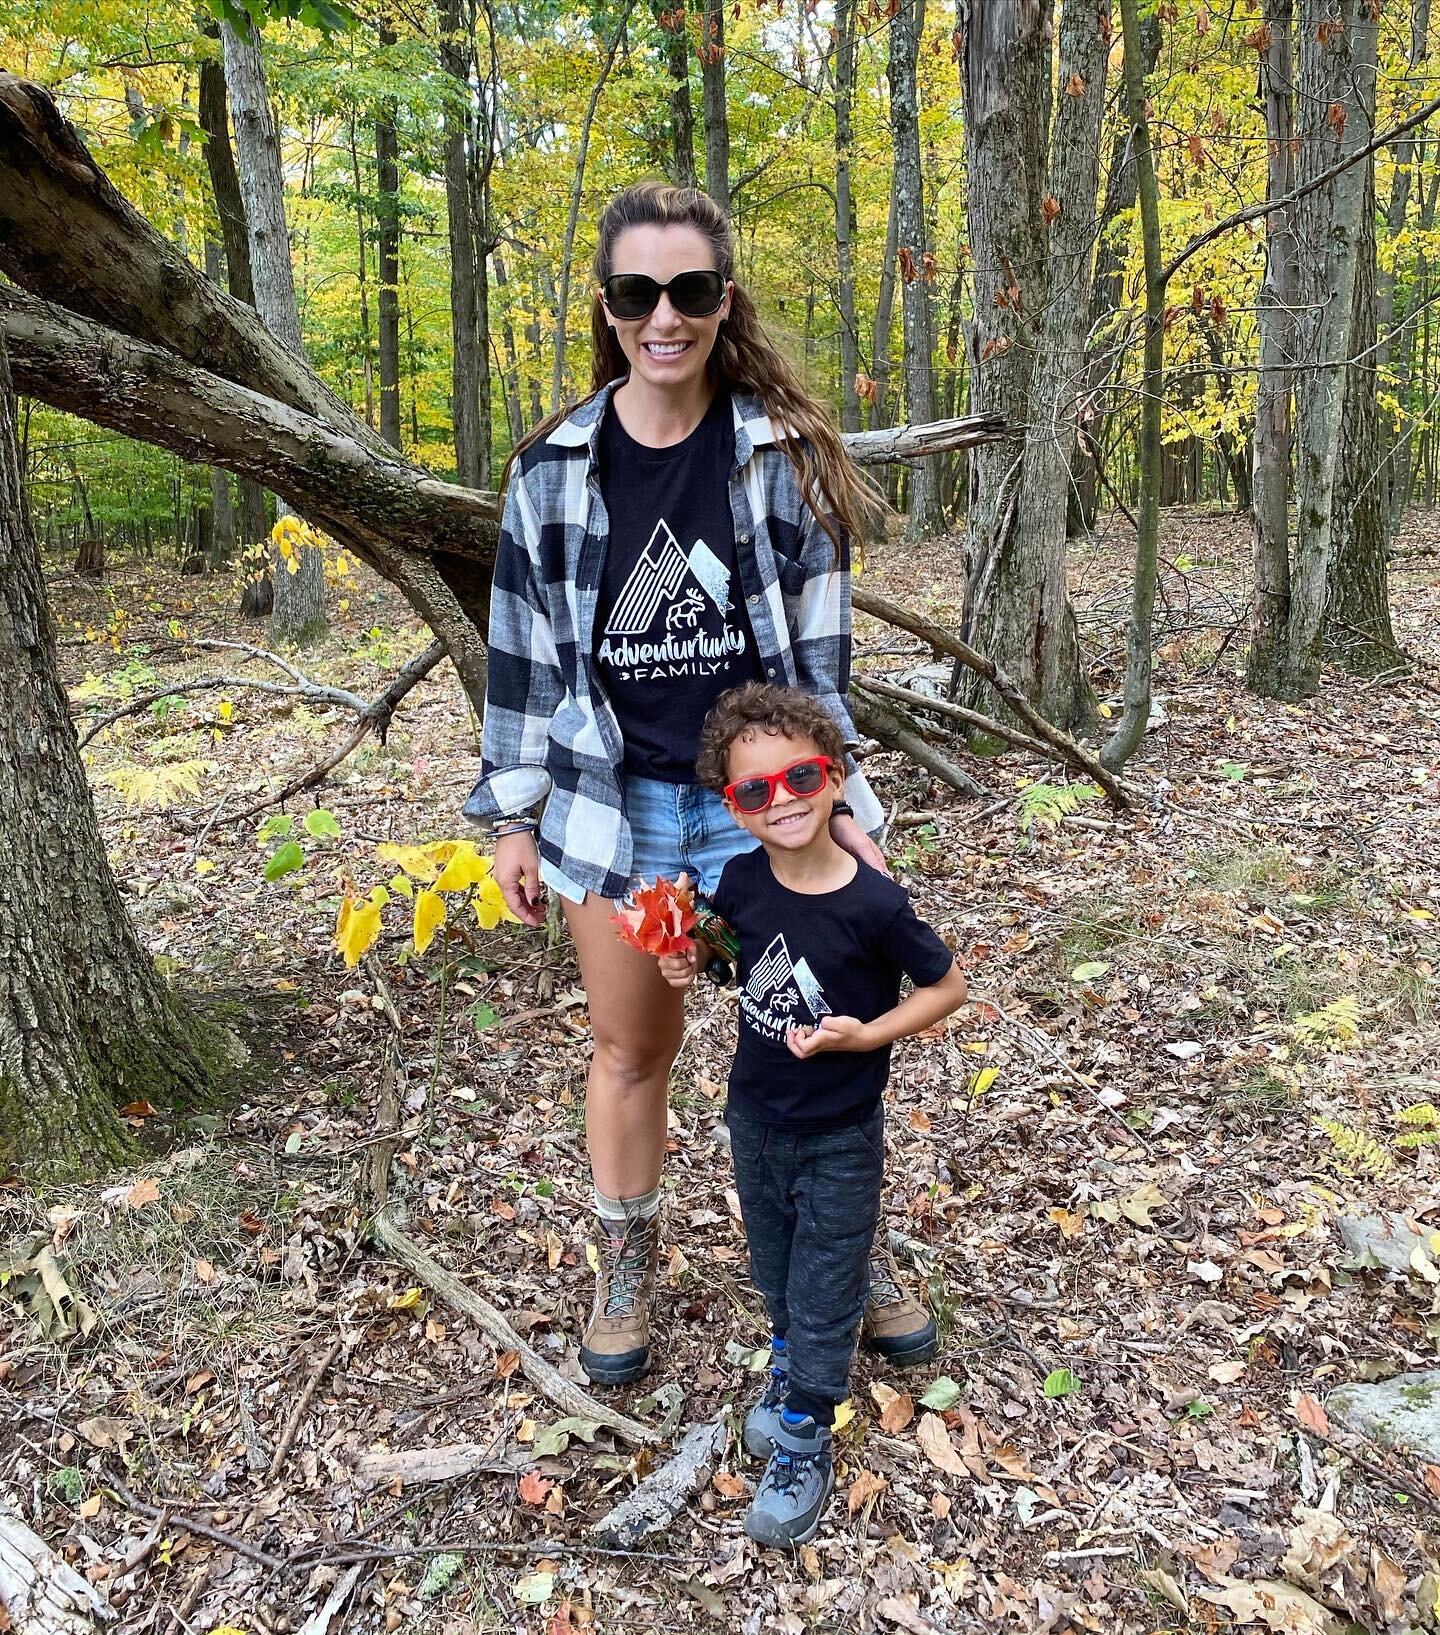 Yesterday we explored the #grandcanyon ... of #pennsylvania

It was an awesome day filled with vibrant fall colors, hidden fields, breathtaking views and tons of laughs! 

In other news I&rsquo;m breaking into the flannel bin already! 

#family #fami